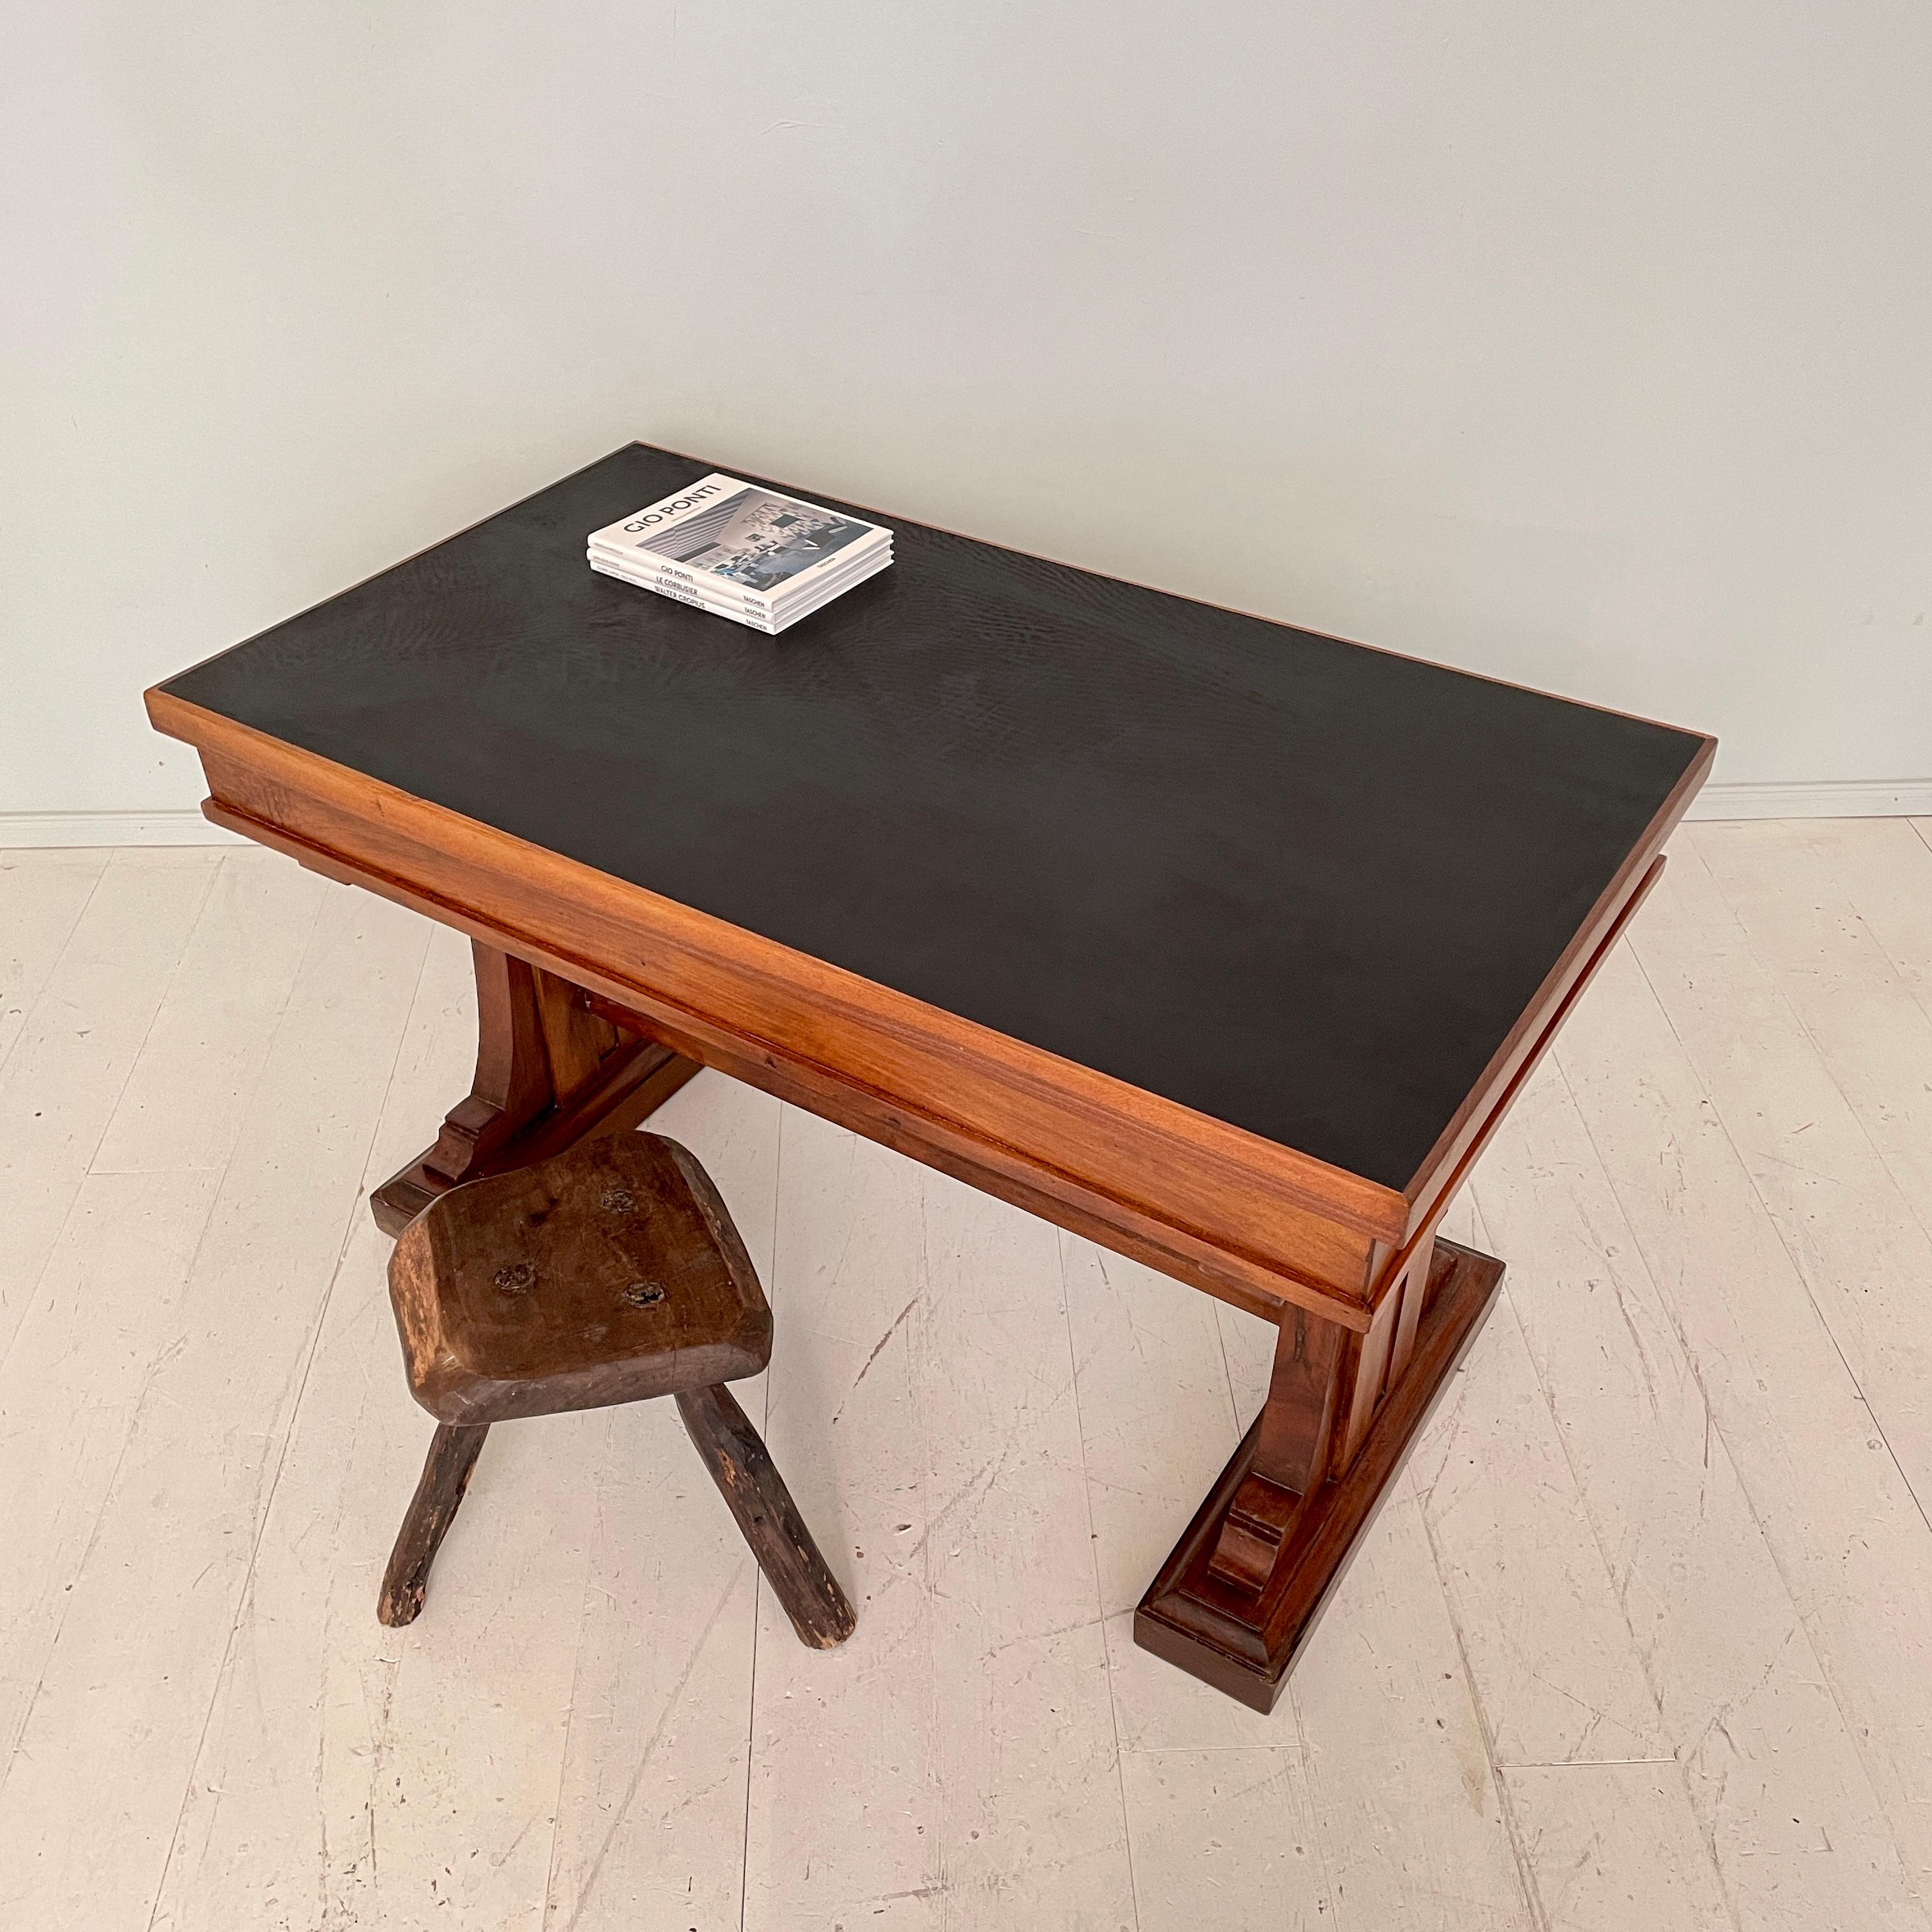 Italian Art Deco Desk or Writing Table in Walnut and Black Leather Top, 1920s 12